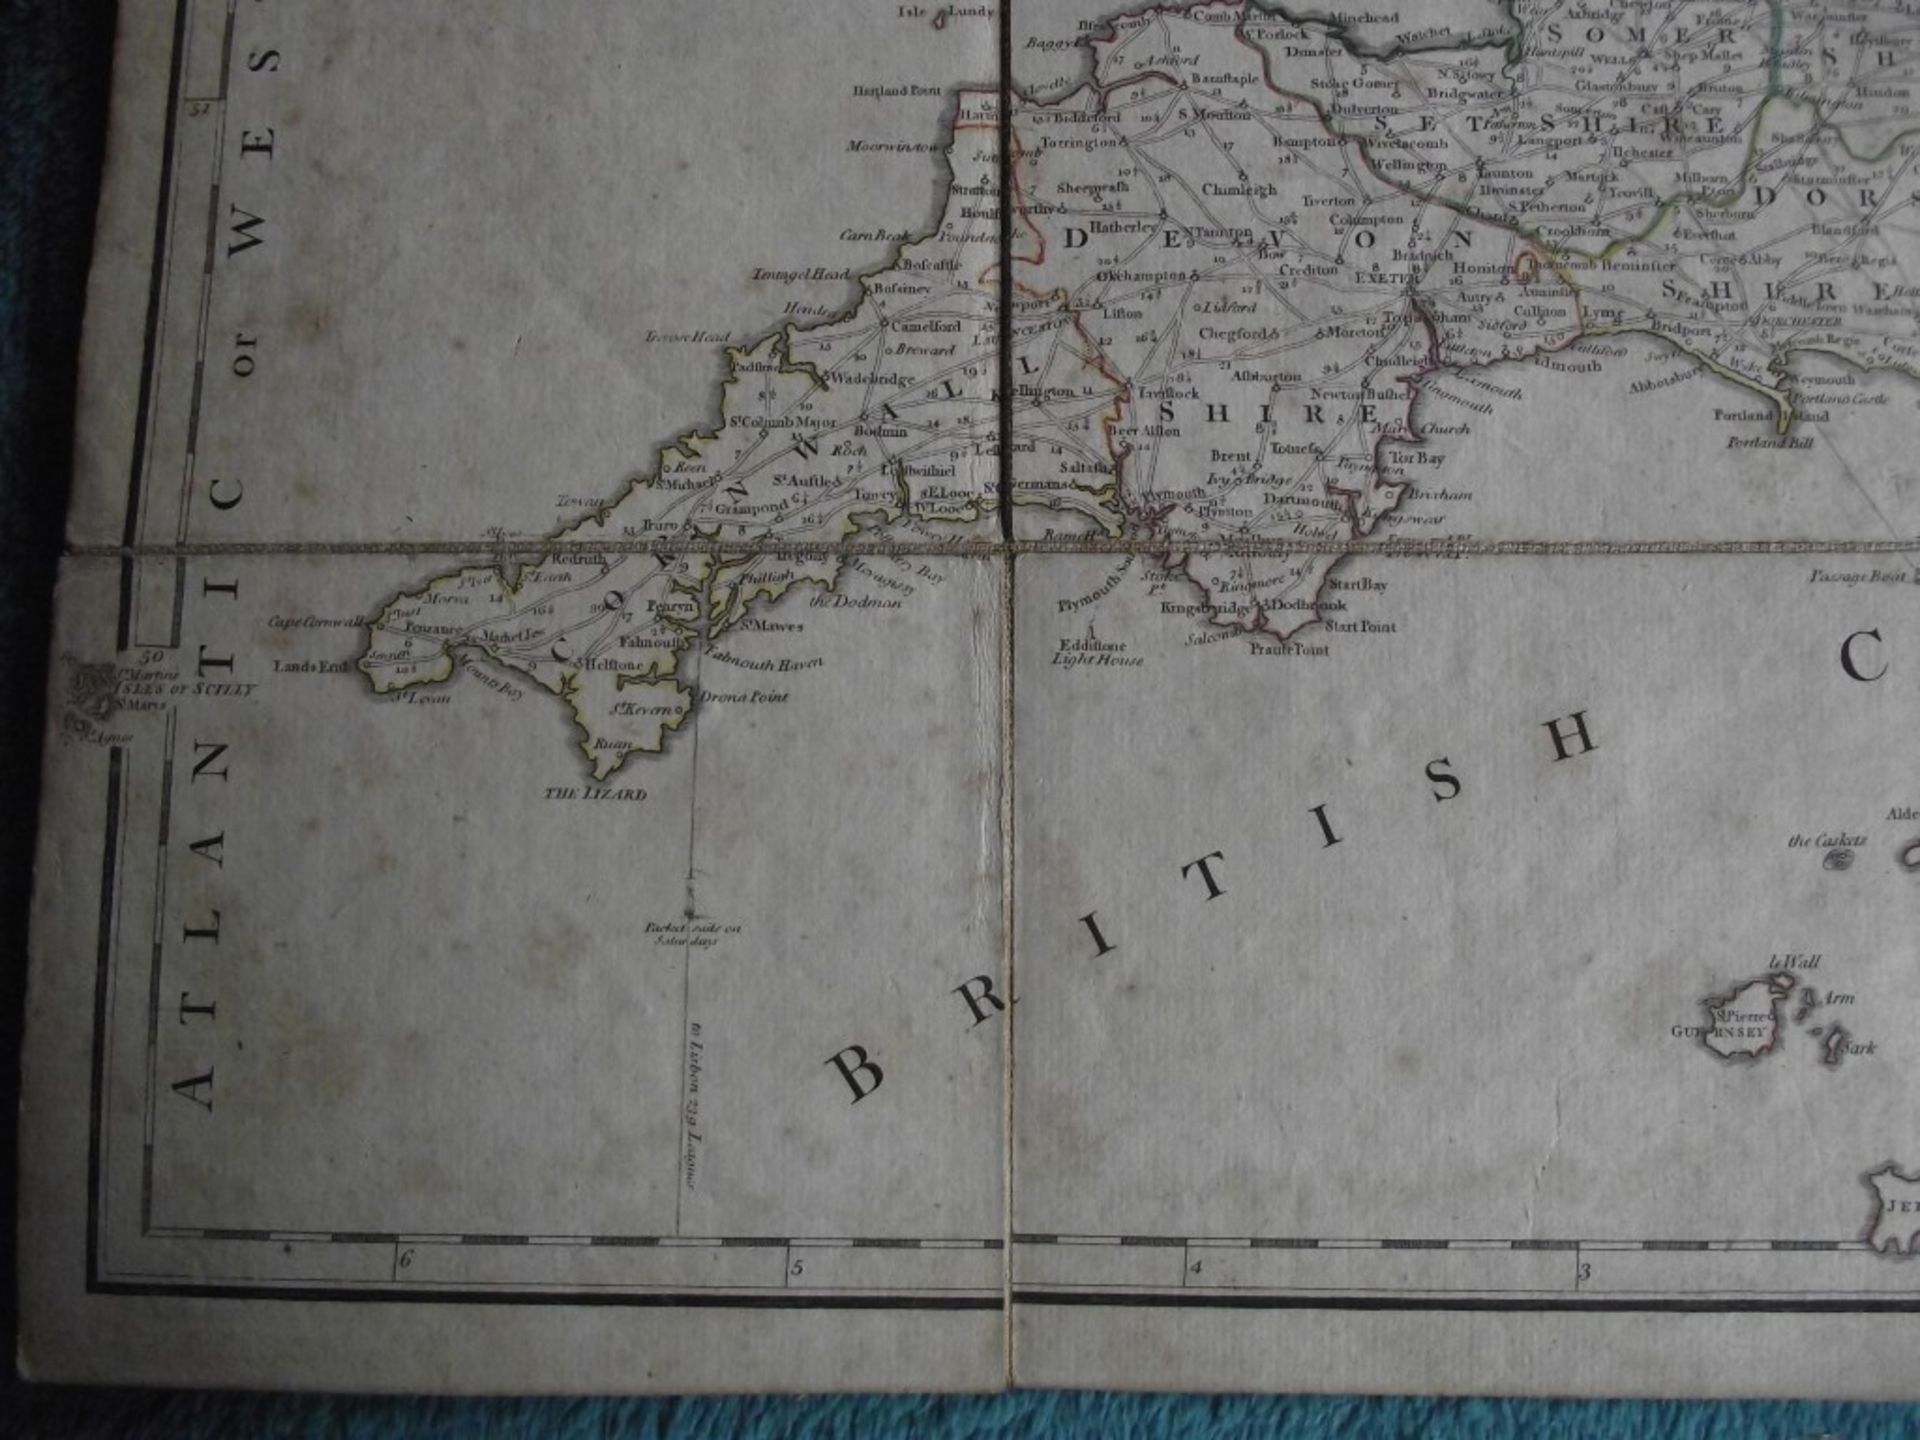 A New Map of The Roads of England and Scotland - Laurie & Whittle - 1794 - With Original Case - Image 14 of 32